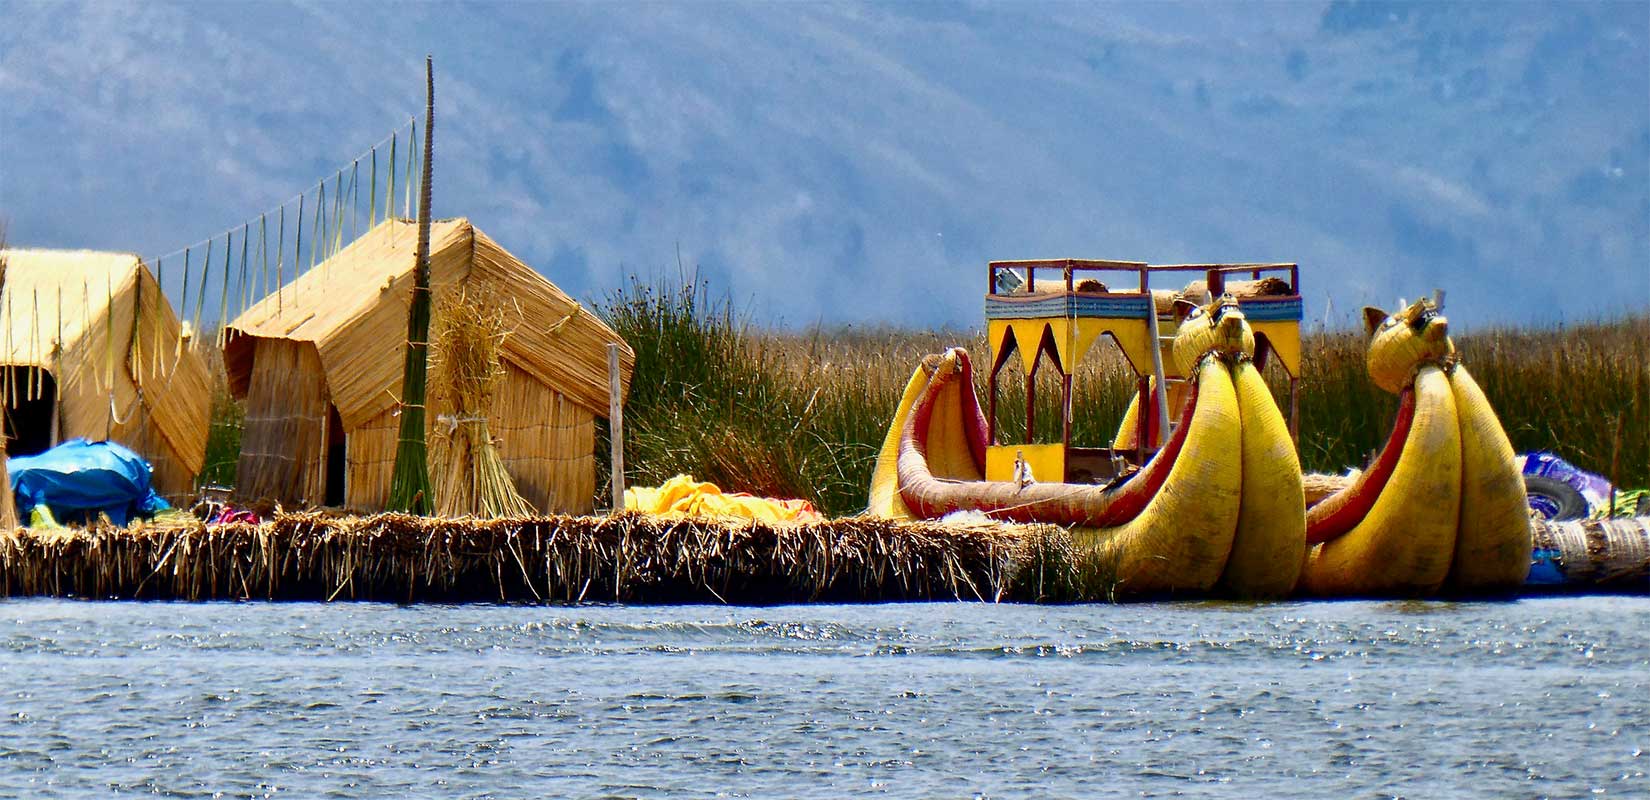 Traditional Boats in Titicaca Lake